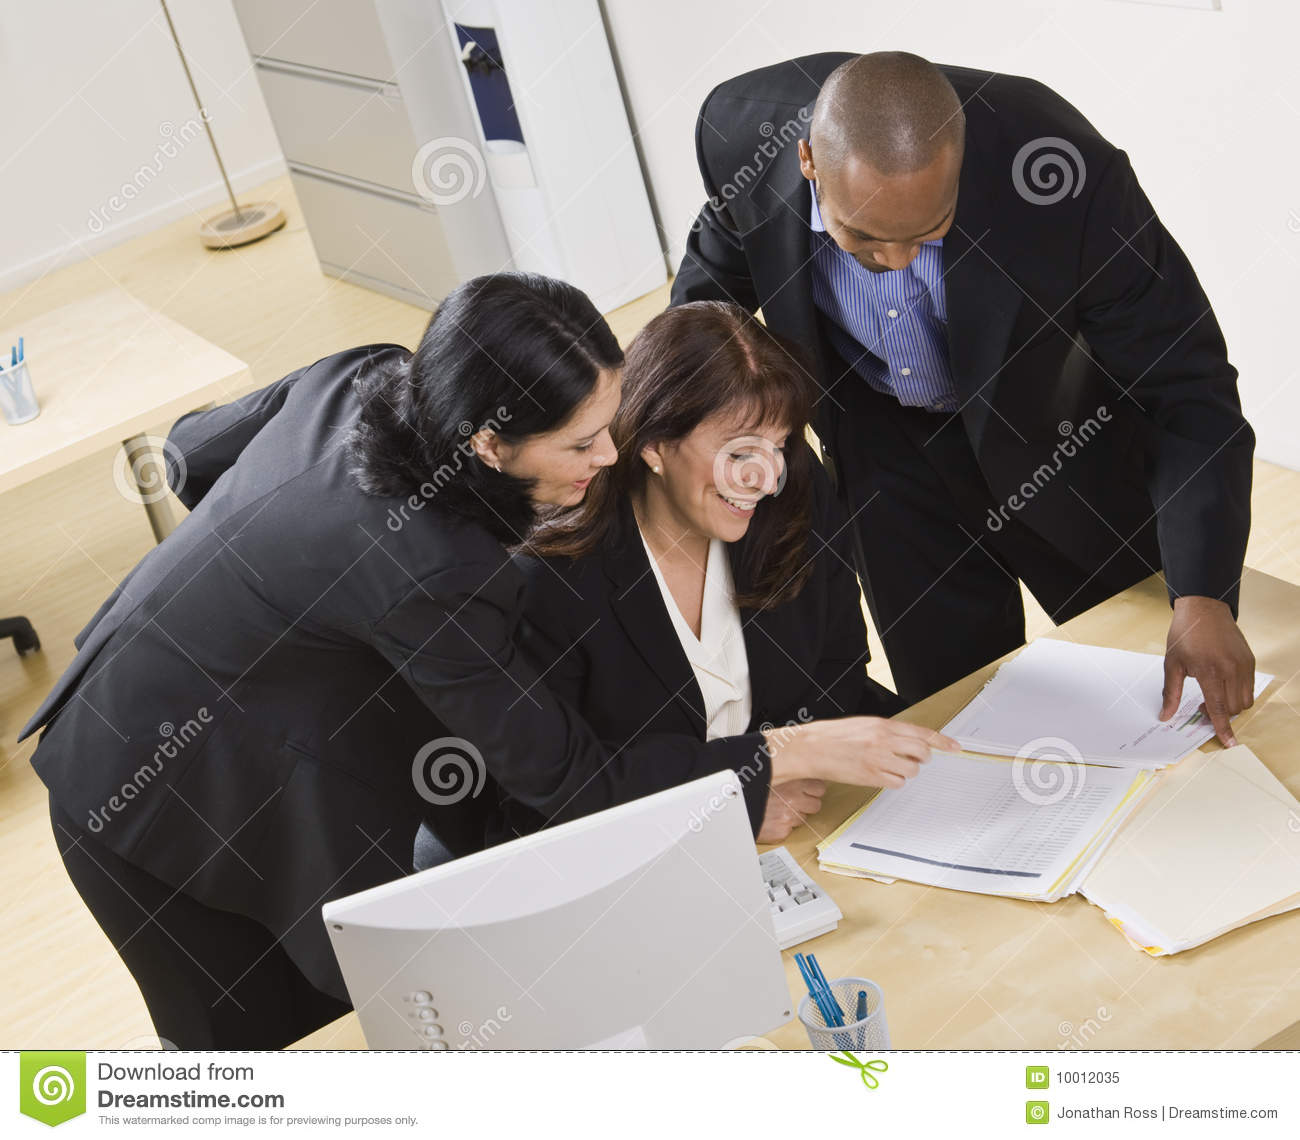 Group Of Business People Are Working Together In An Office  They Are